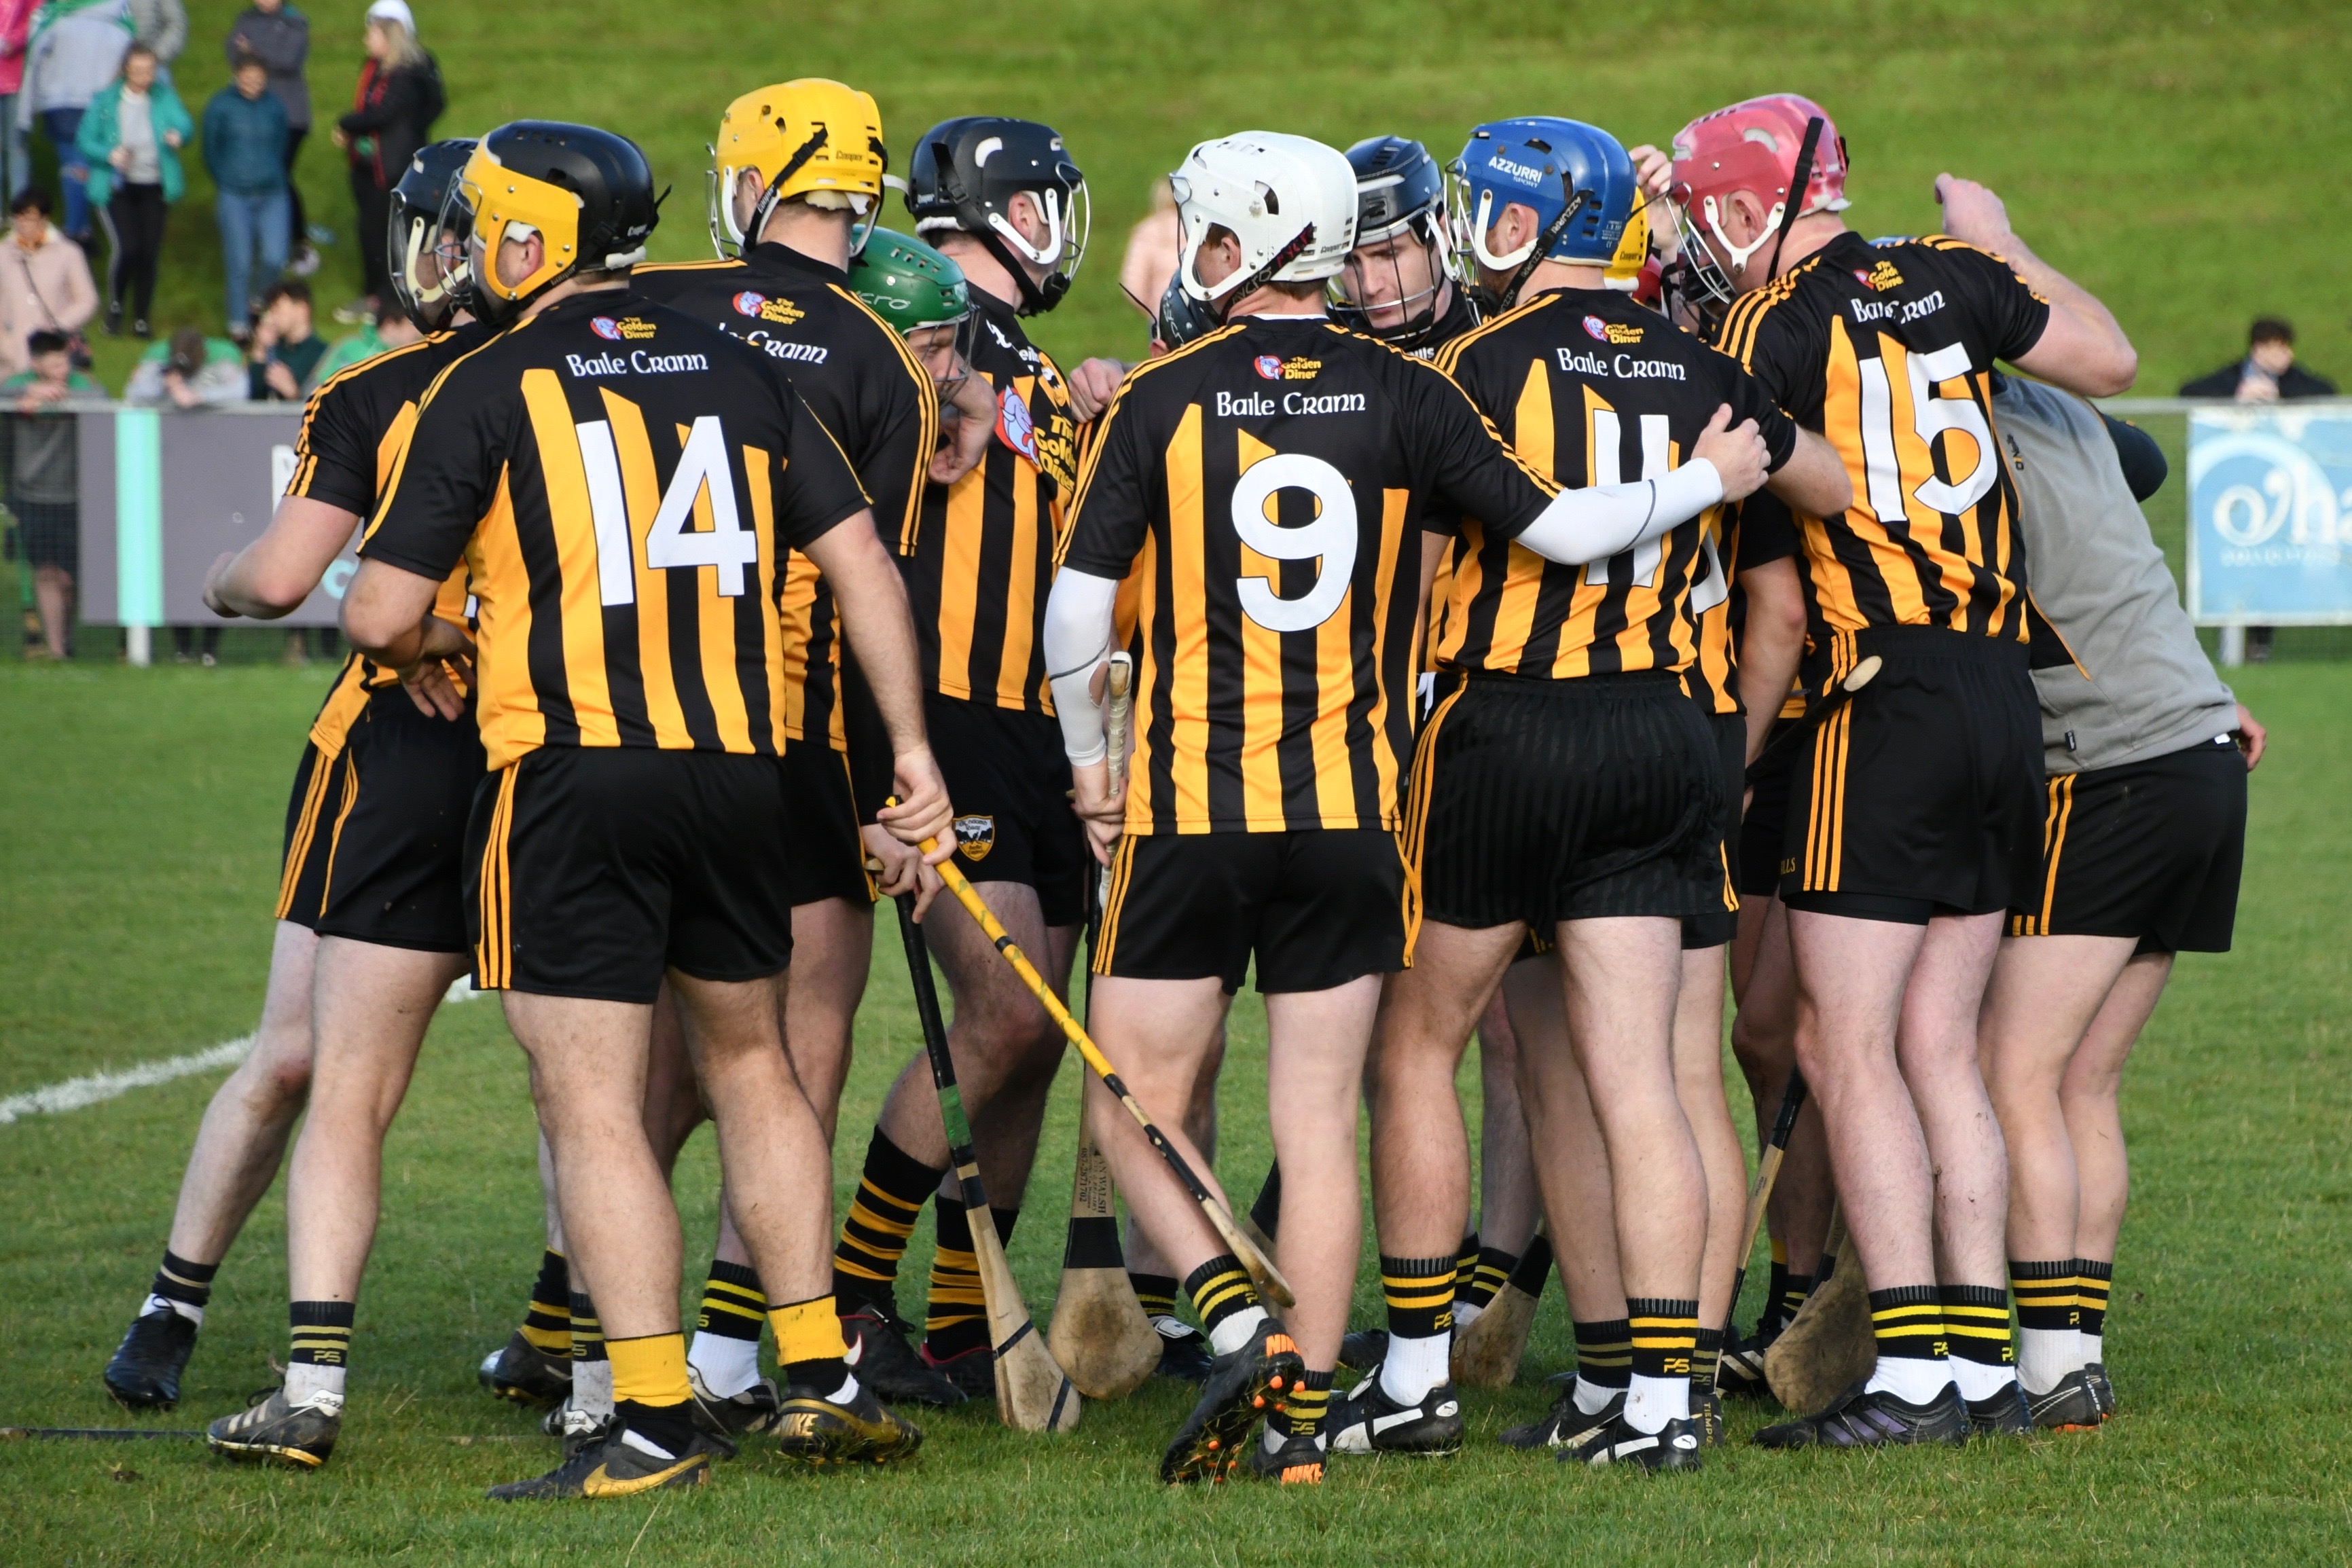 The Senior Hurling Co-Manager And Captain Discuss Their Involvement In Hurling Ahead Of Sunday’s Game